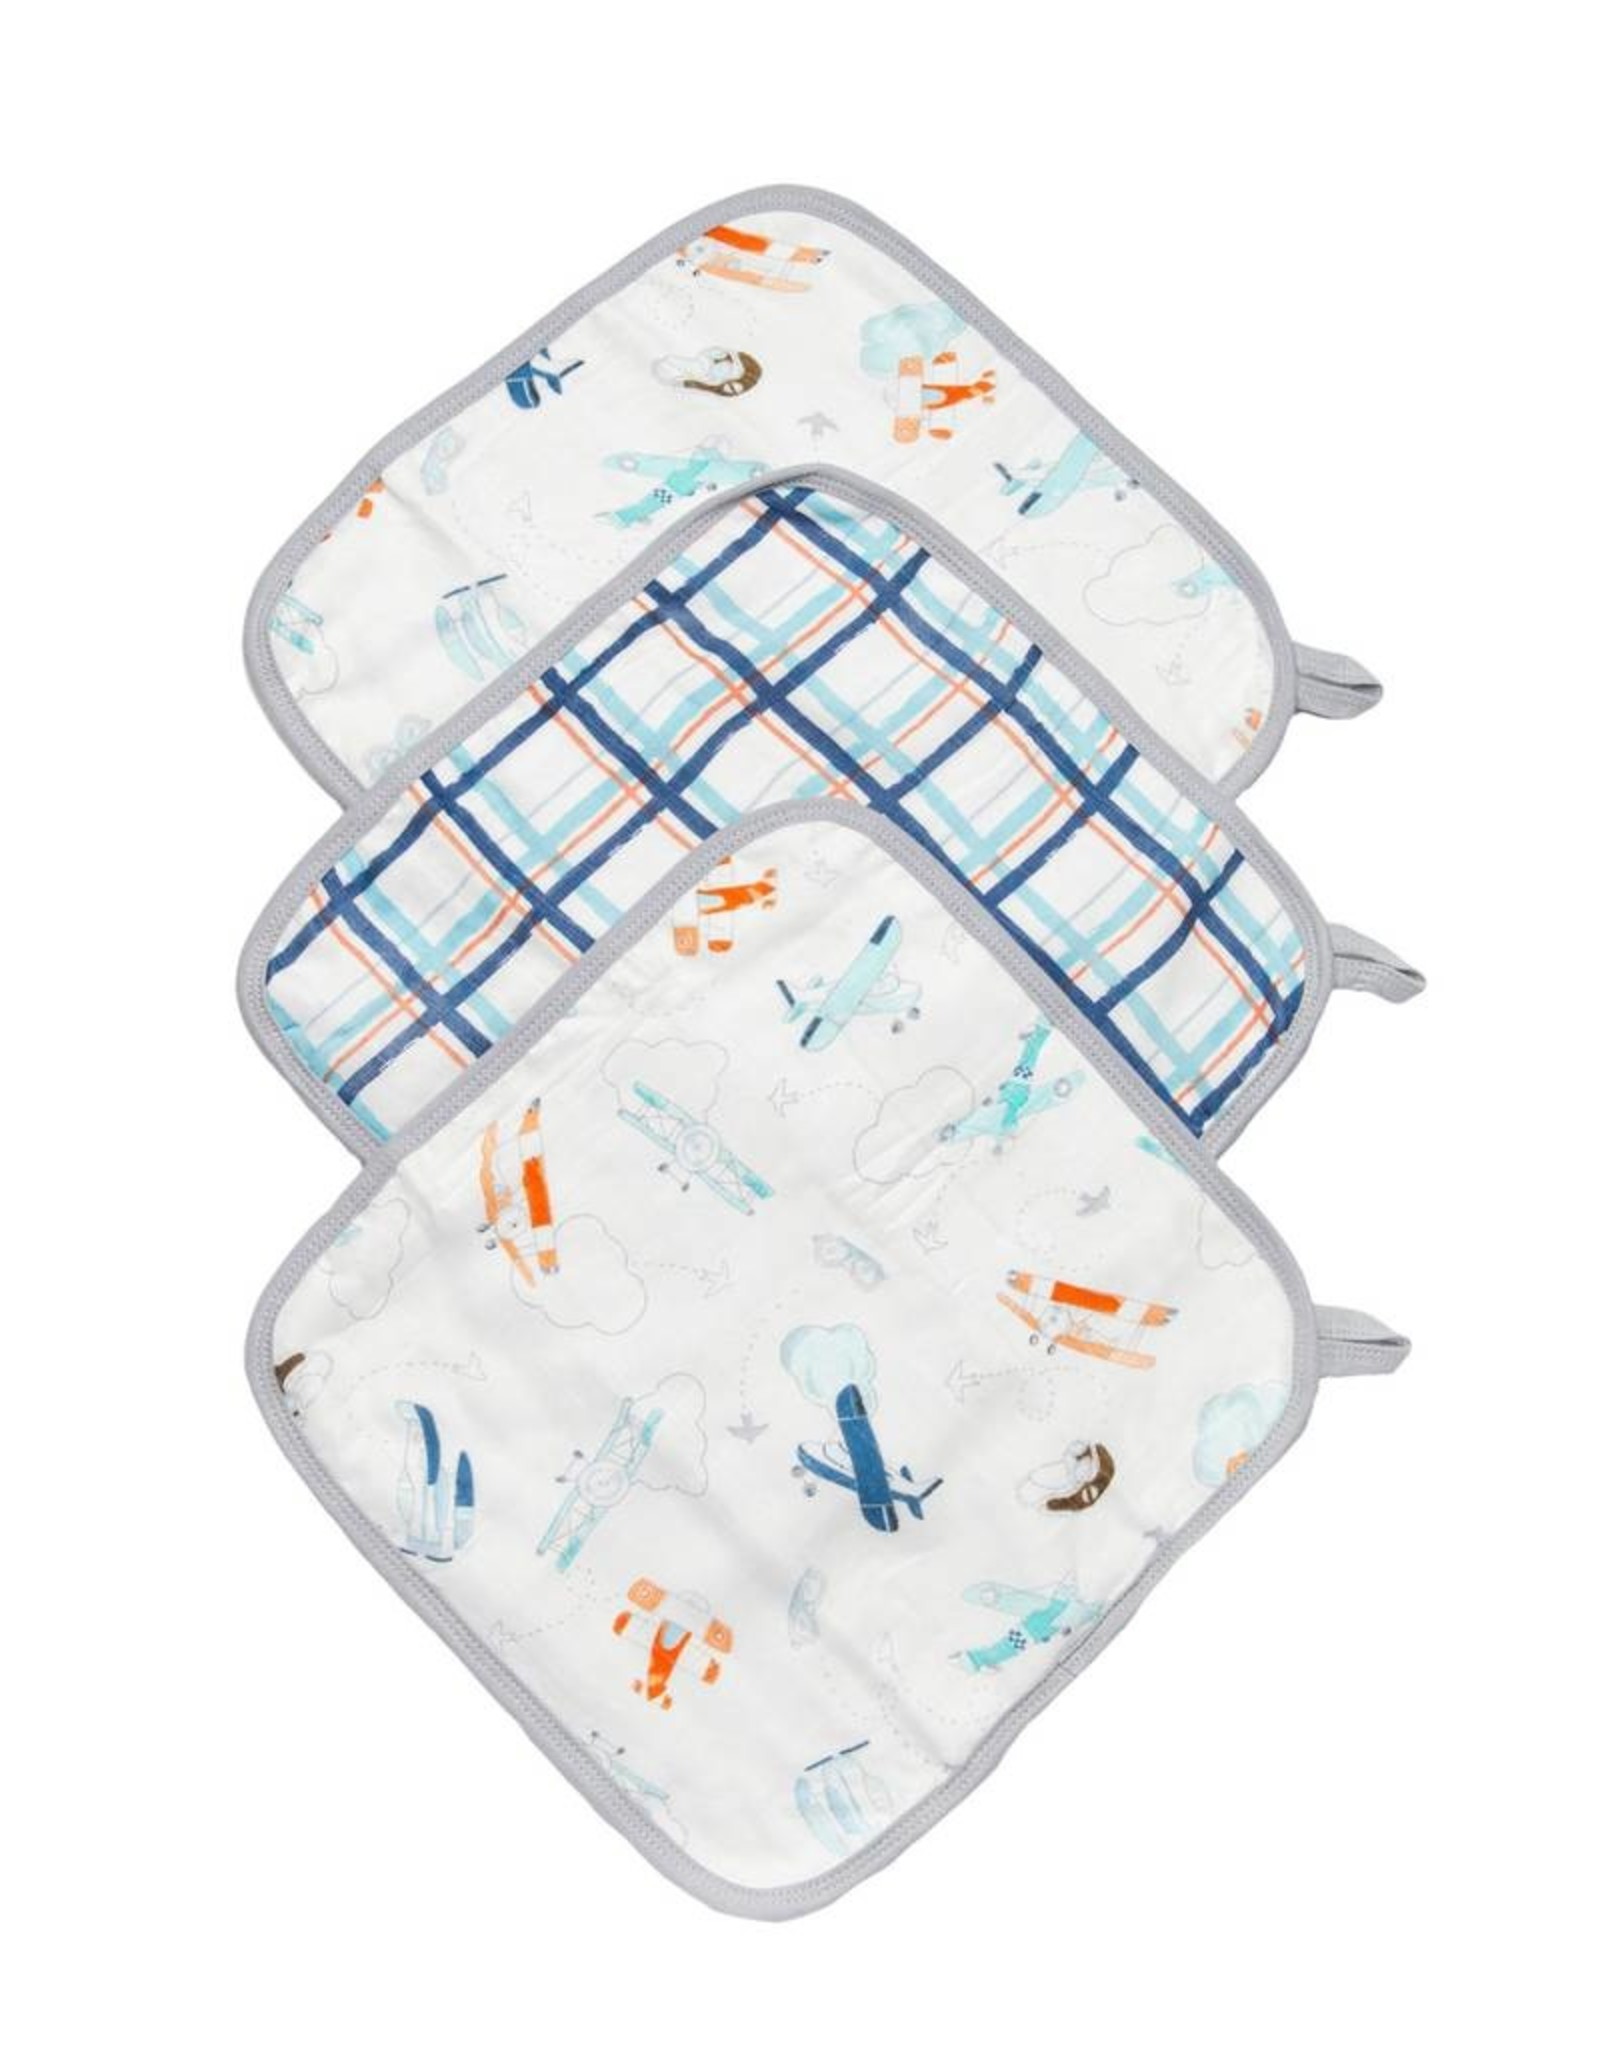 Loulou Lolipop Washcloths 3 pieces set, Born To Fly